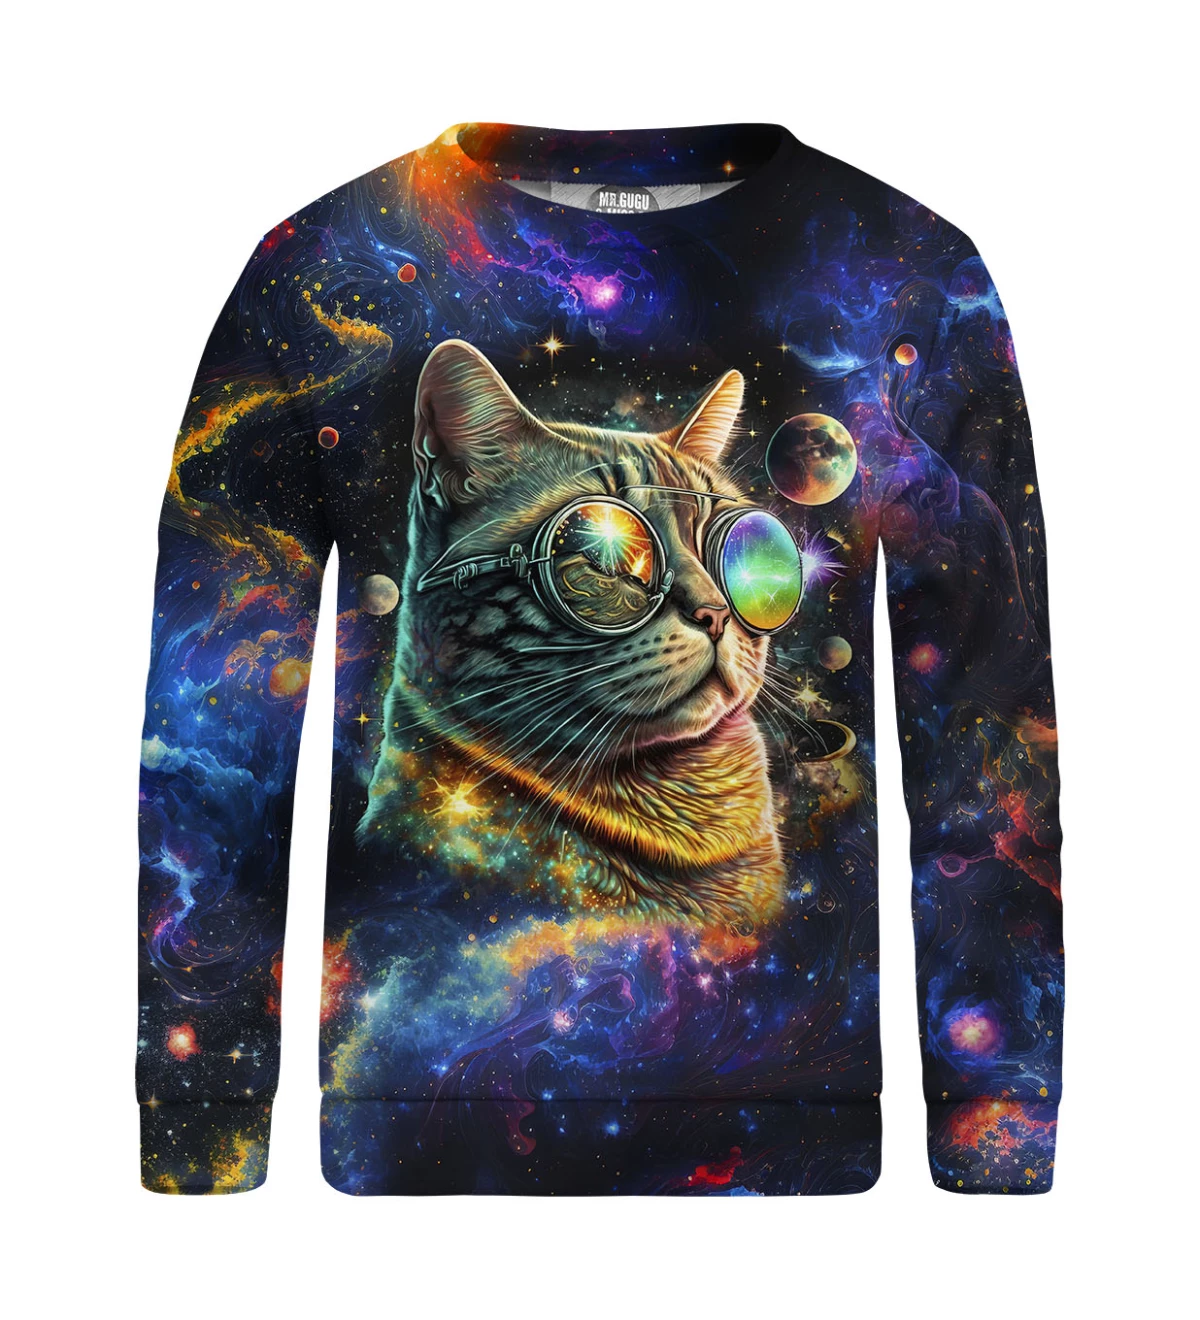 Trippy cat sweater for kids